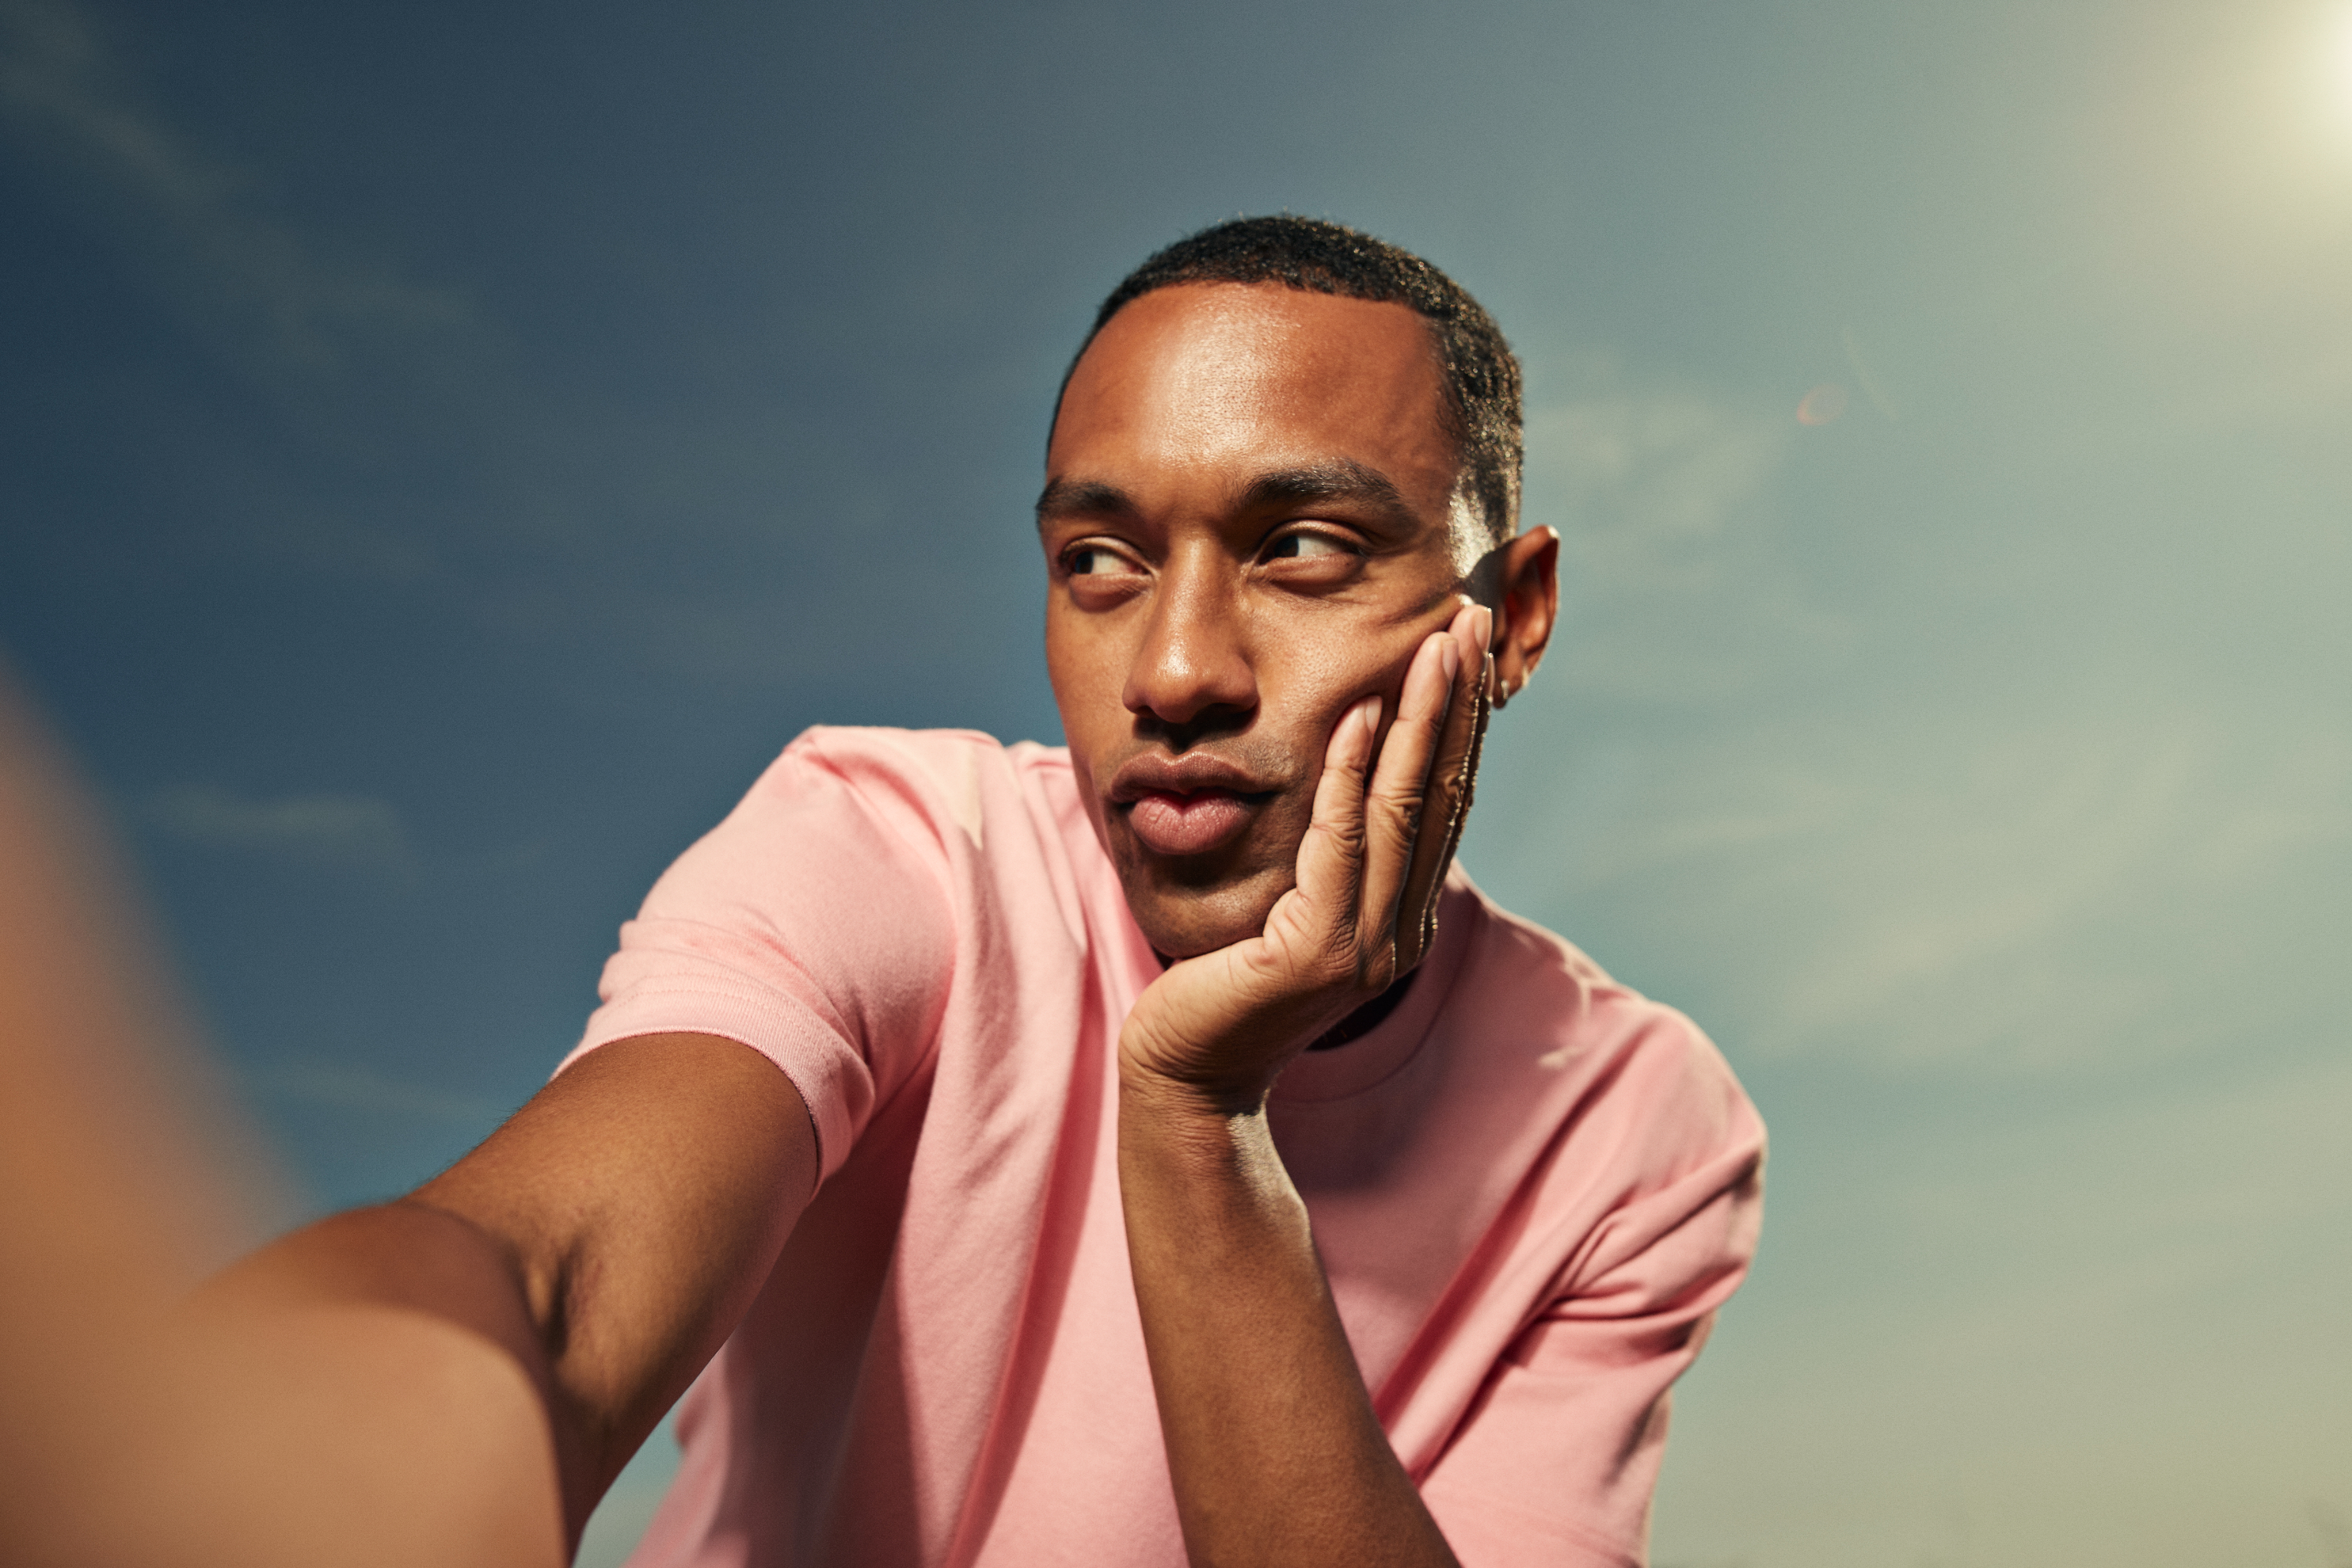 A person in a pink shirt gazes pensively into the distance, resting their chin on their hand